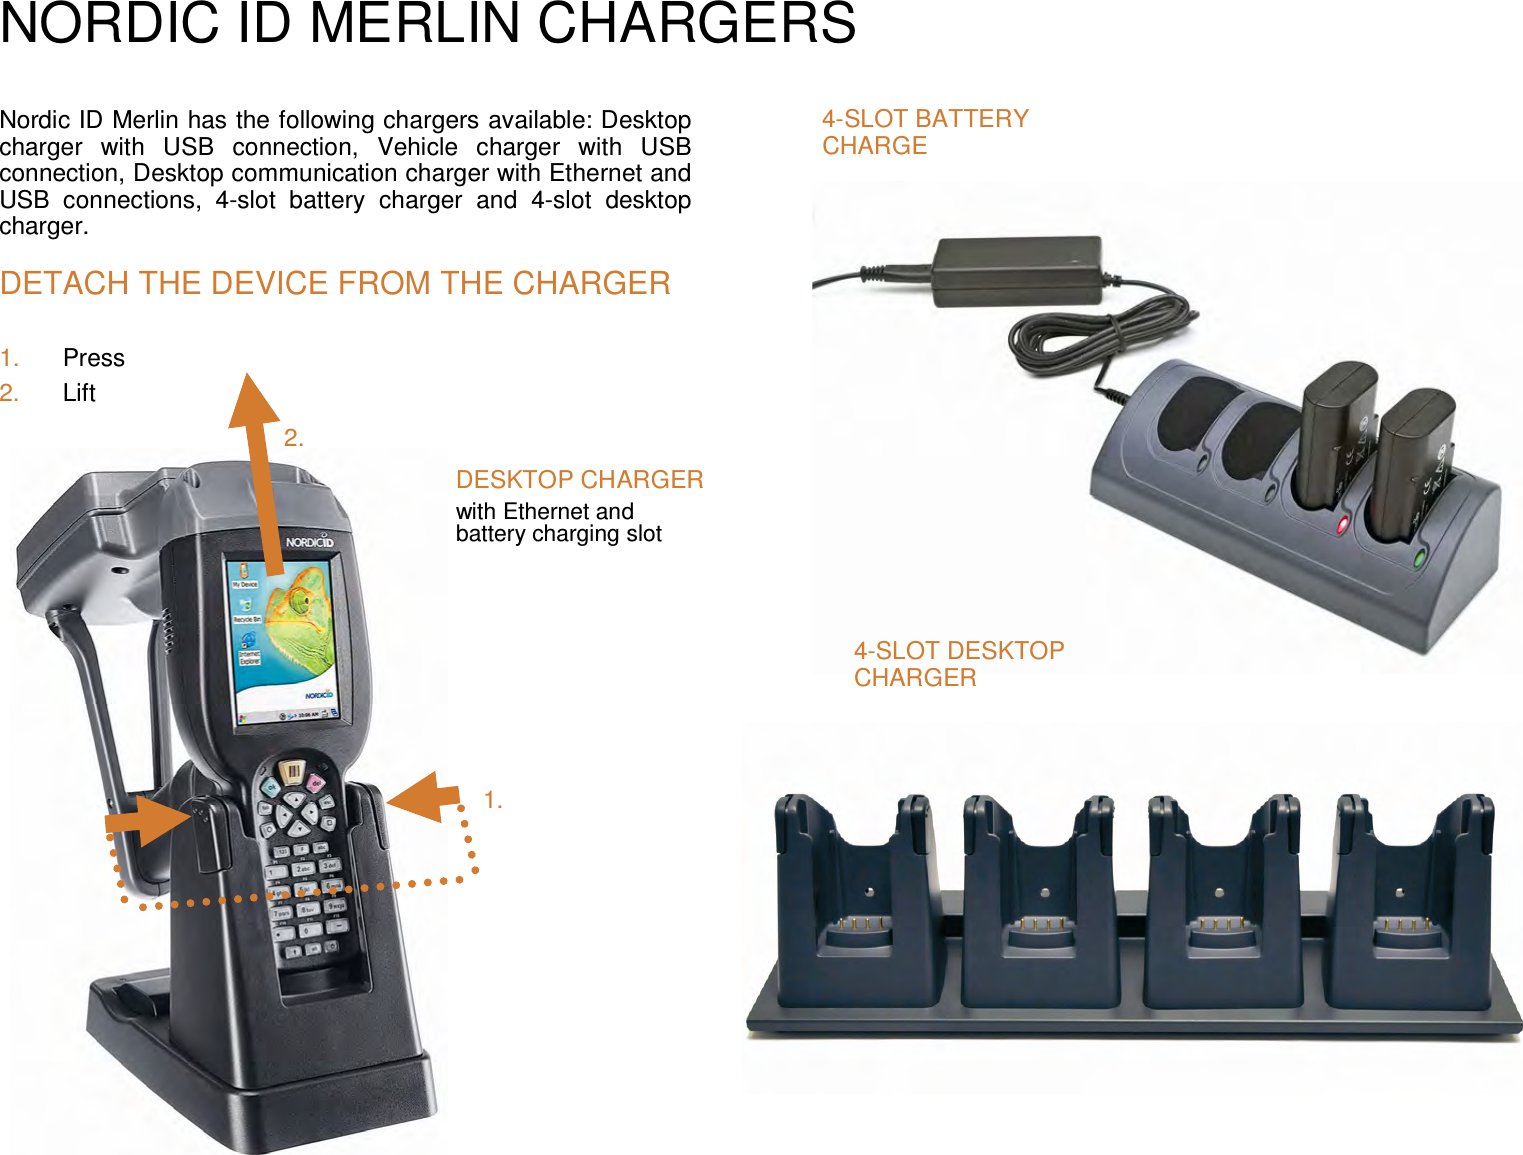 NORDIC ID MERLIN CHARGERS   Nordic ID Merlin has the following chargers available: Desktop charger  with  USB  connection,  Vehicle  charger  with  USB connection, Desktop communication charger with Ethernet and USB  connections,  4-slot  battery  charger  and  4-slot  desktop charger.  DETACH THE DEVICE FROM THE CHARGER 1.  Press 2.  Lift                                     DESKTOP CHARGER  with Ethernet and  battery charging slot 4-SLOT BATTERY CHARGE 4-SLOT DESKTOP CHARGER 1. 2. 